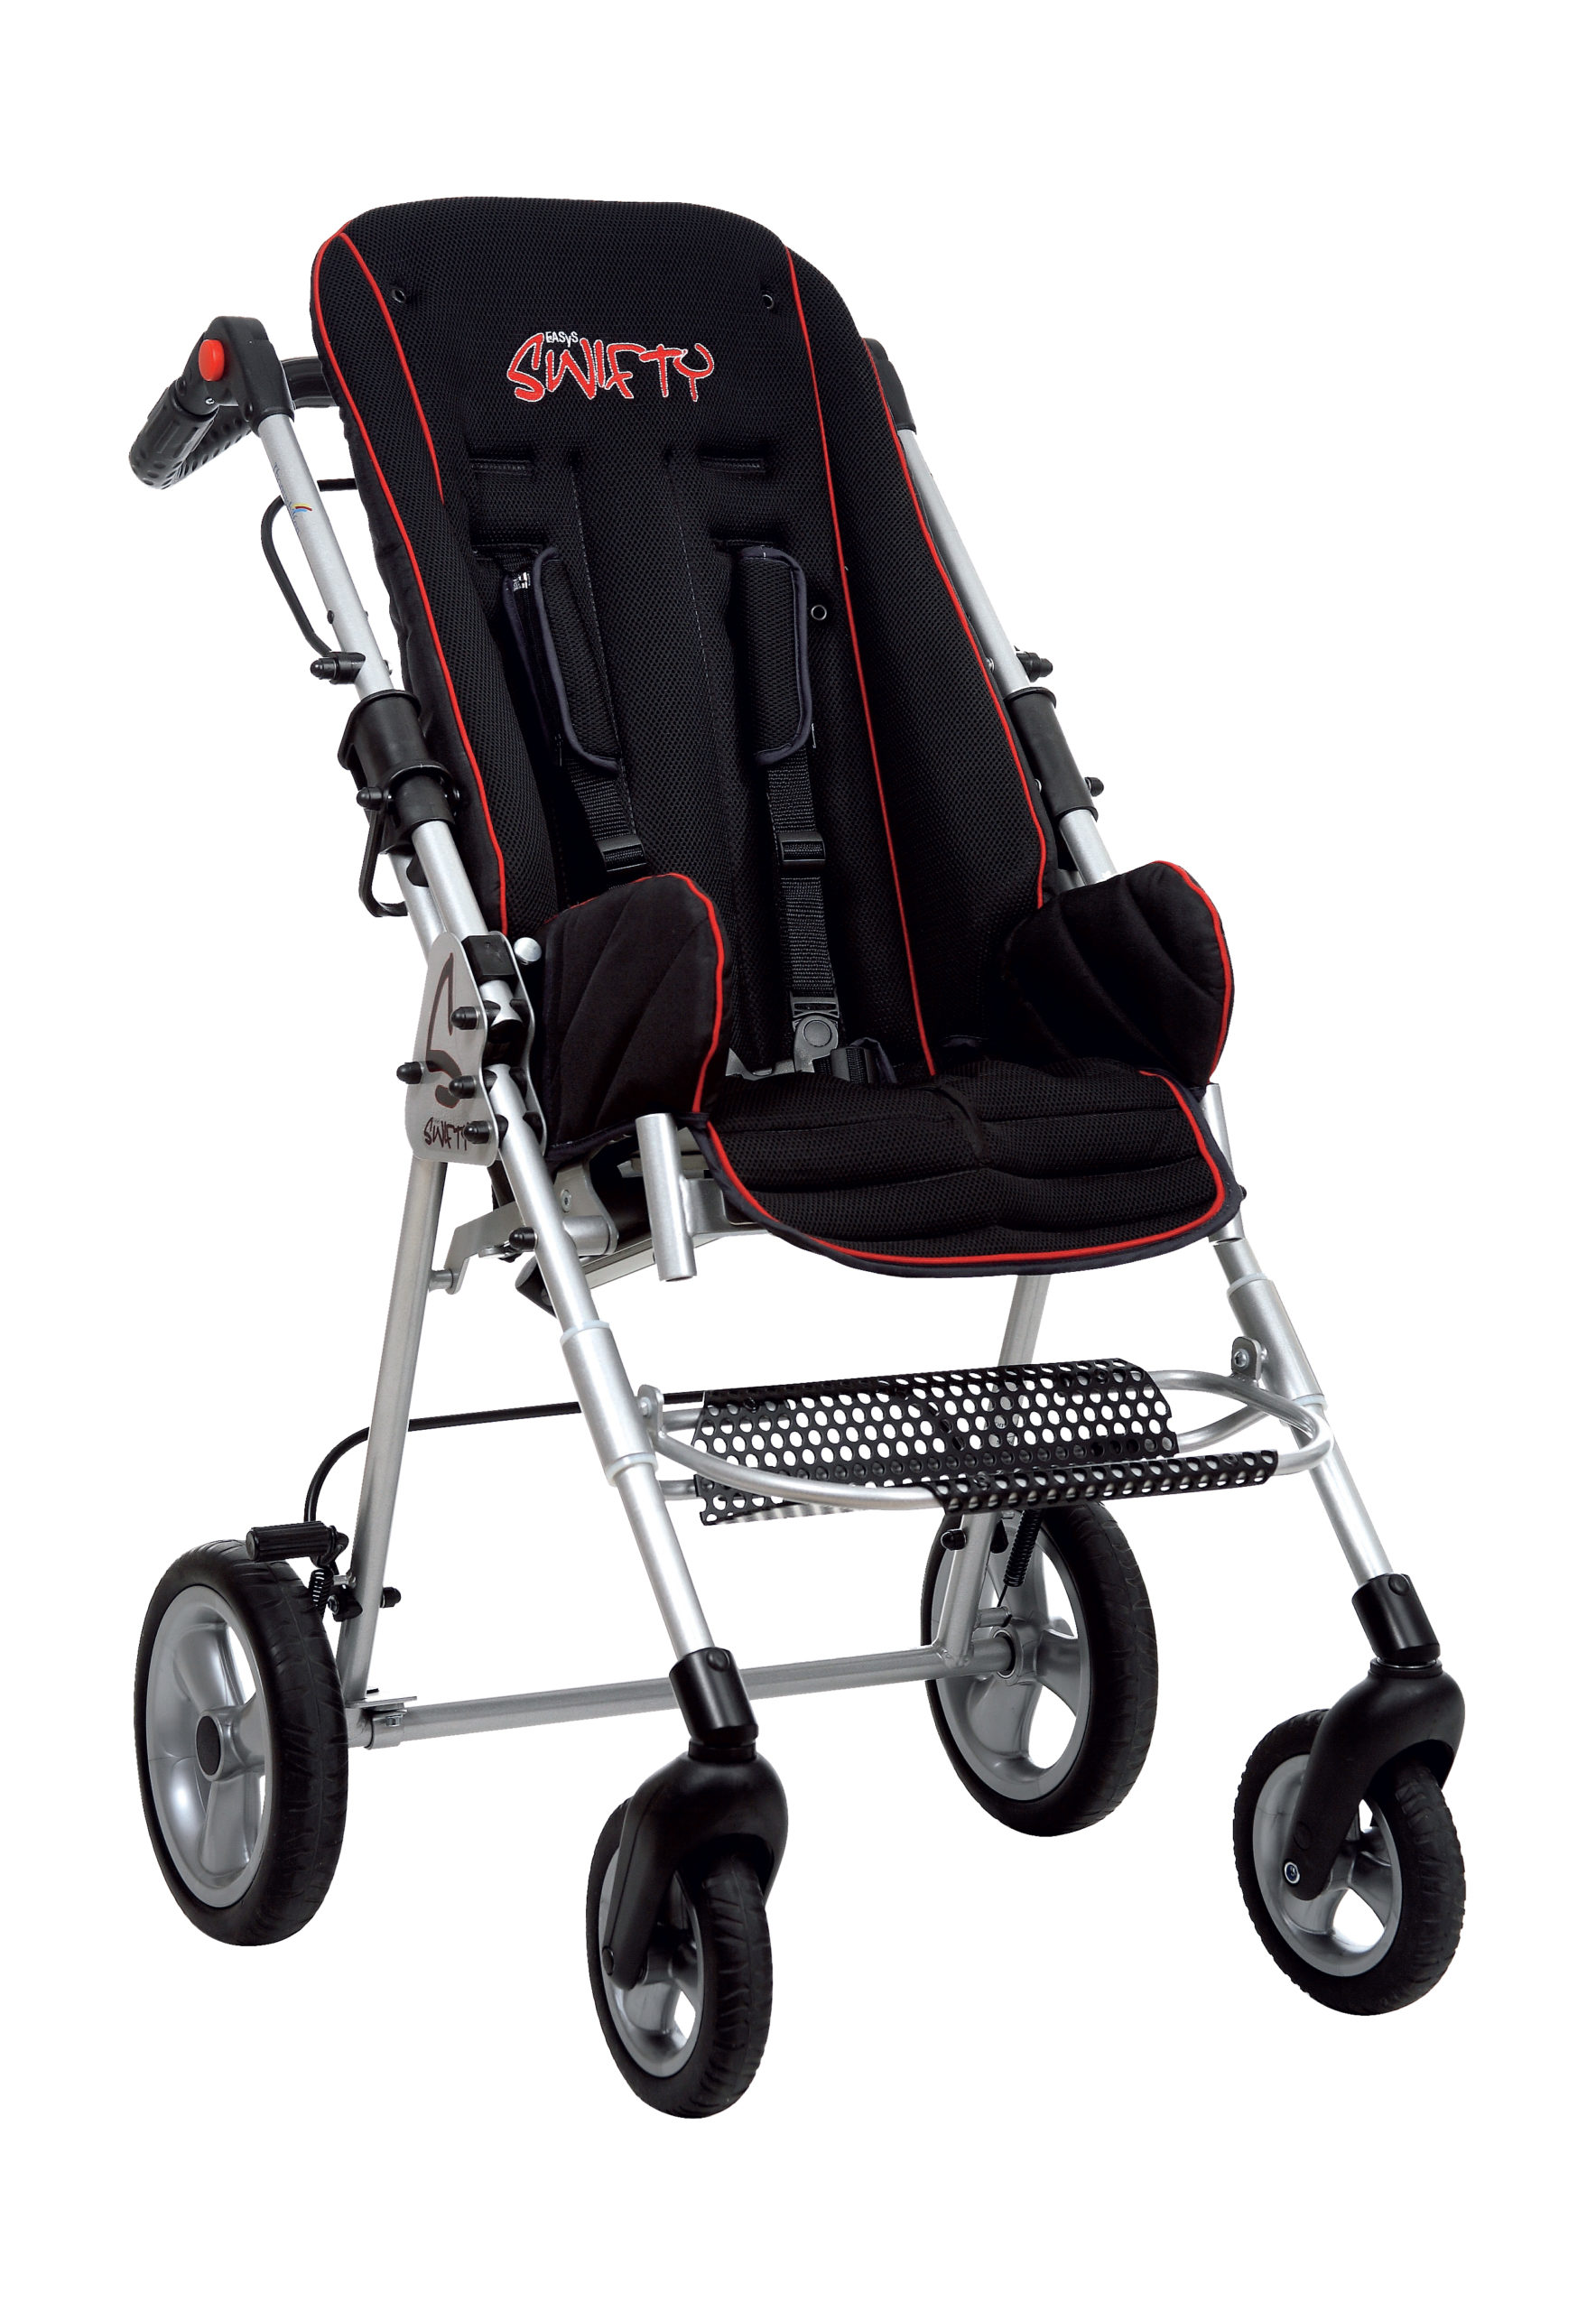 Paediatric Strollers Archives Active